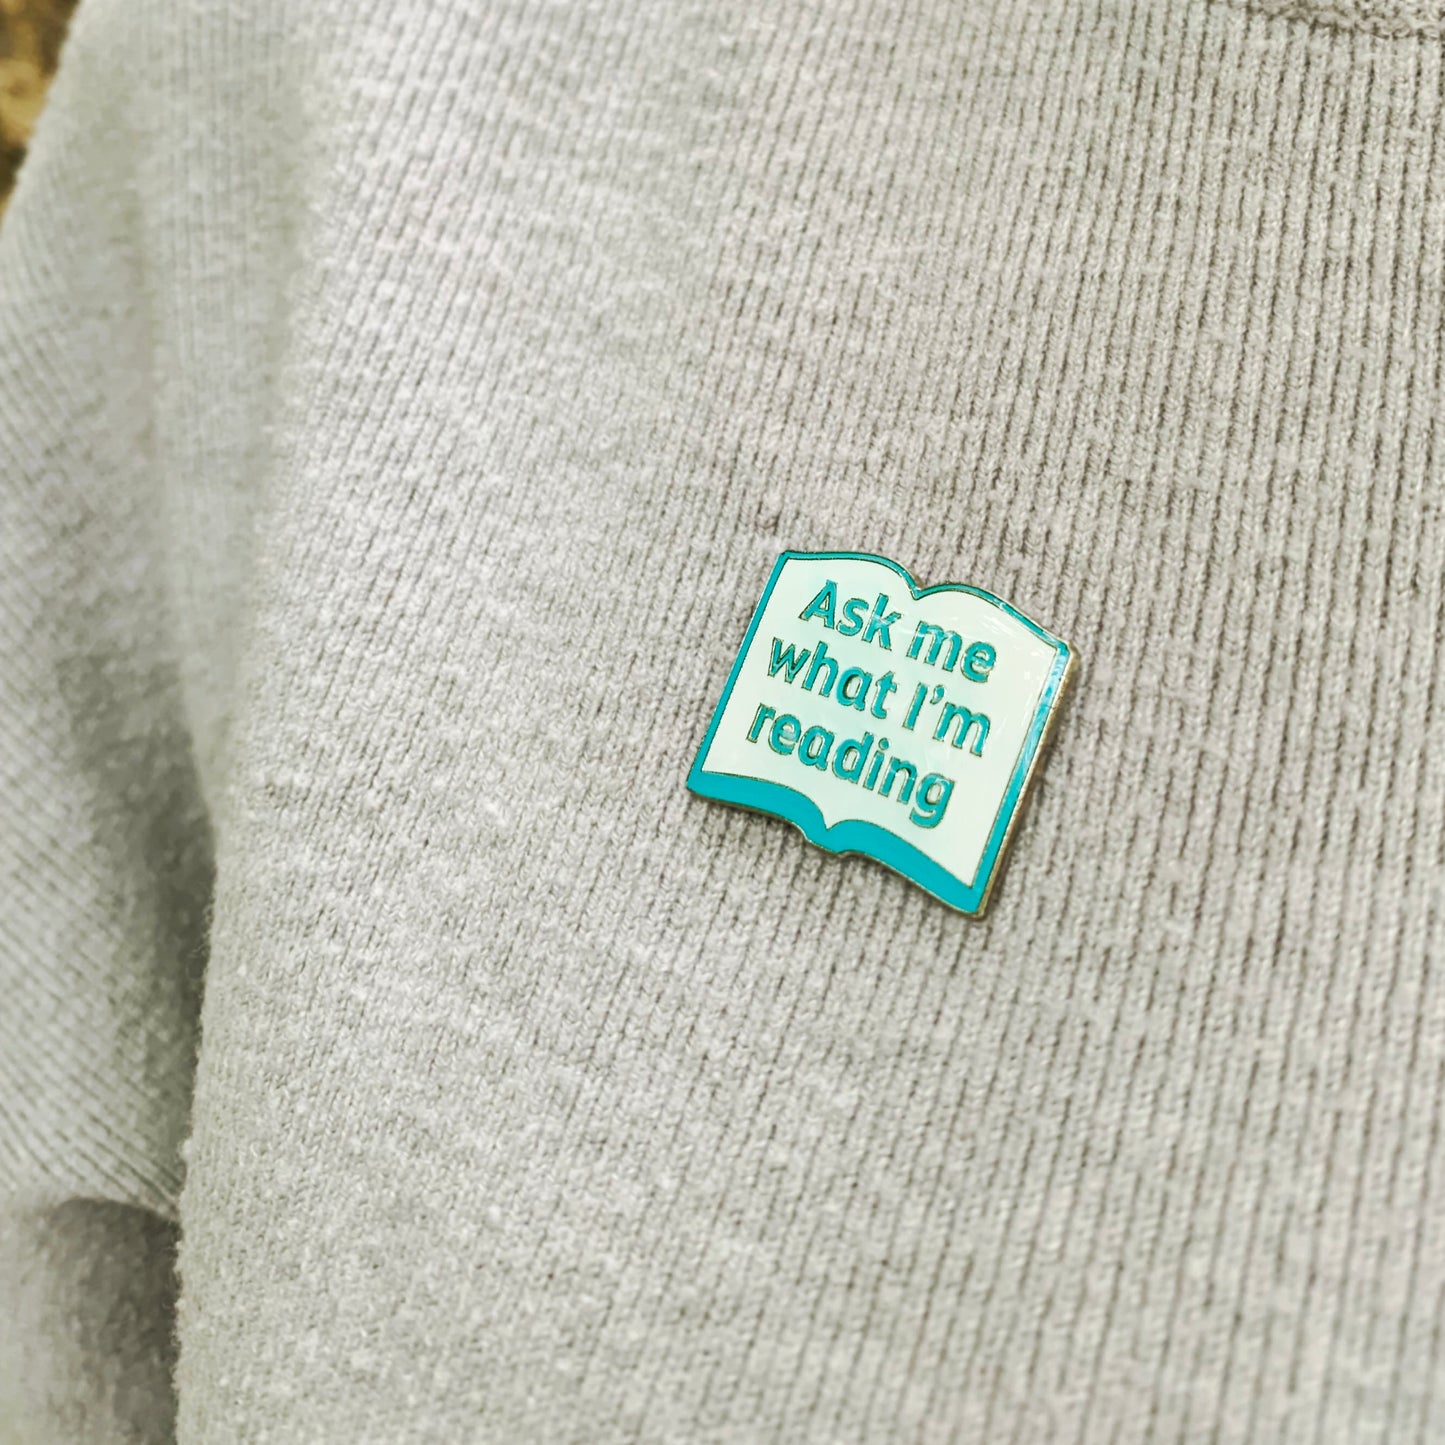 'Ask me what I'm reading' pin badge